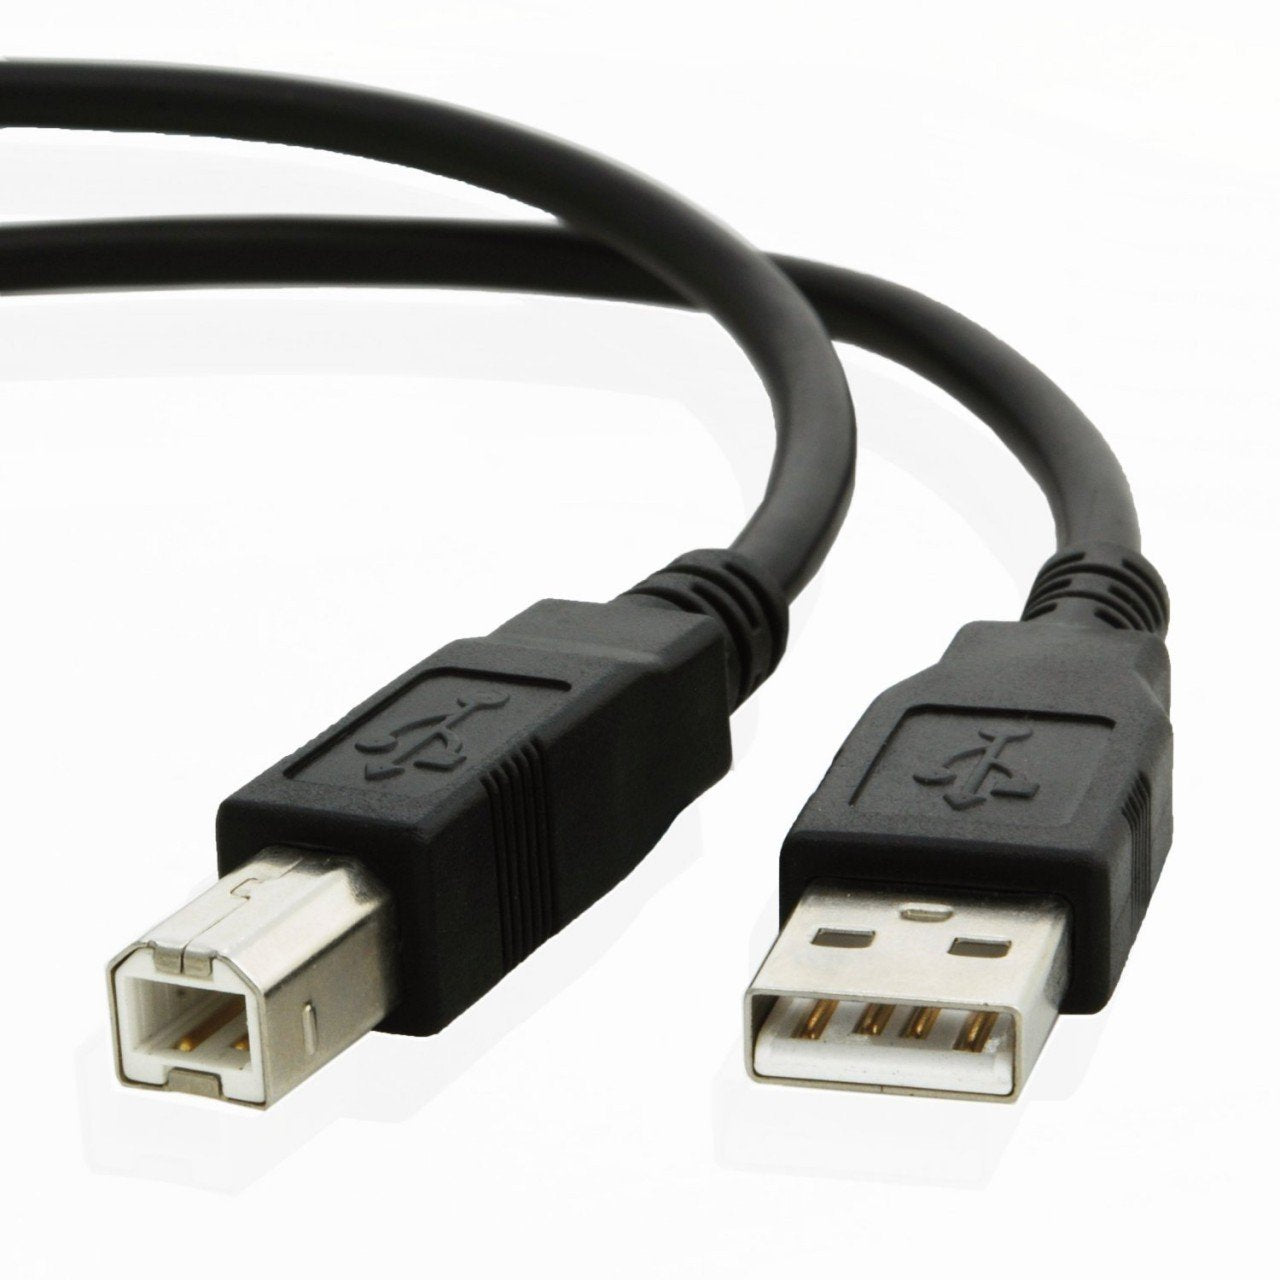 USB cable for Epson IMPACT LQ-590